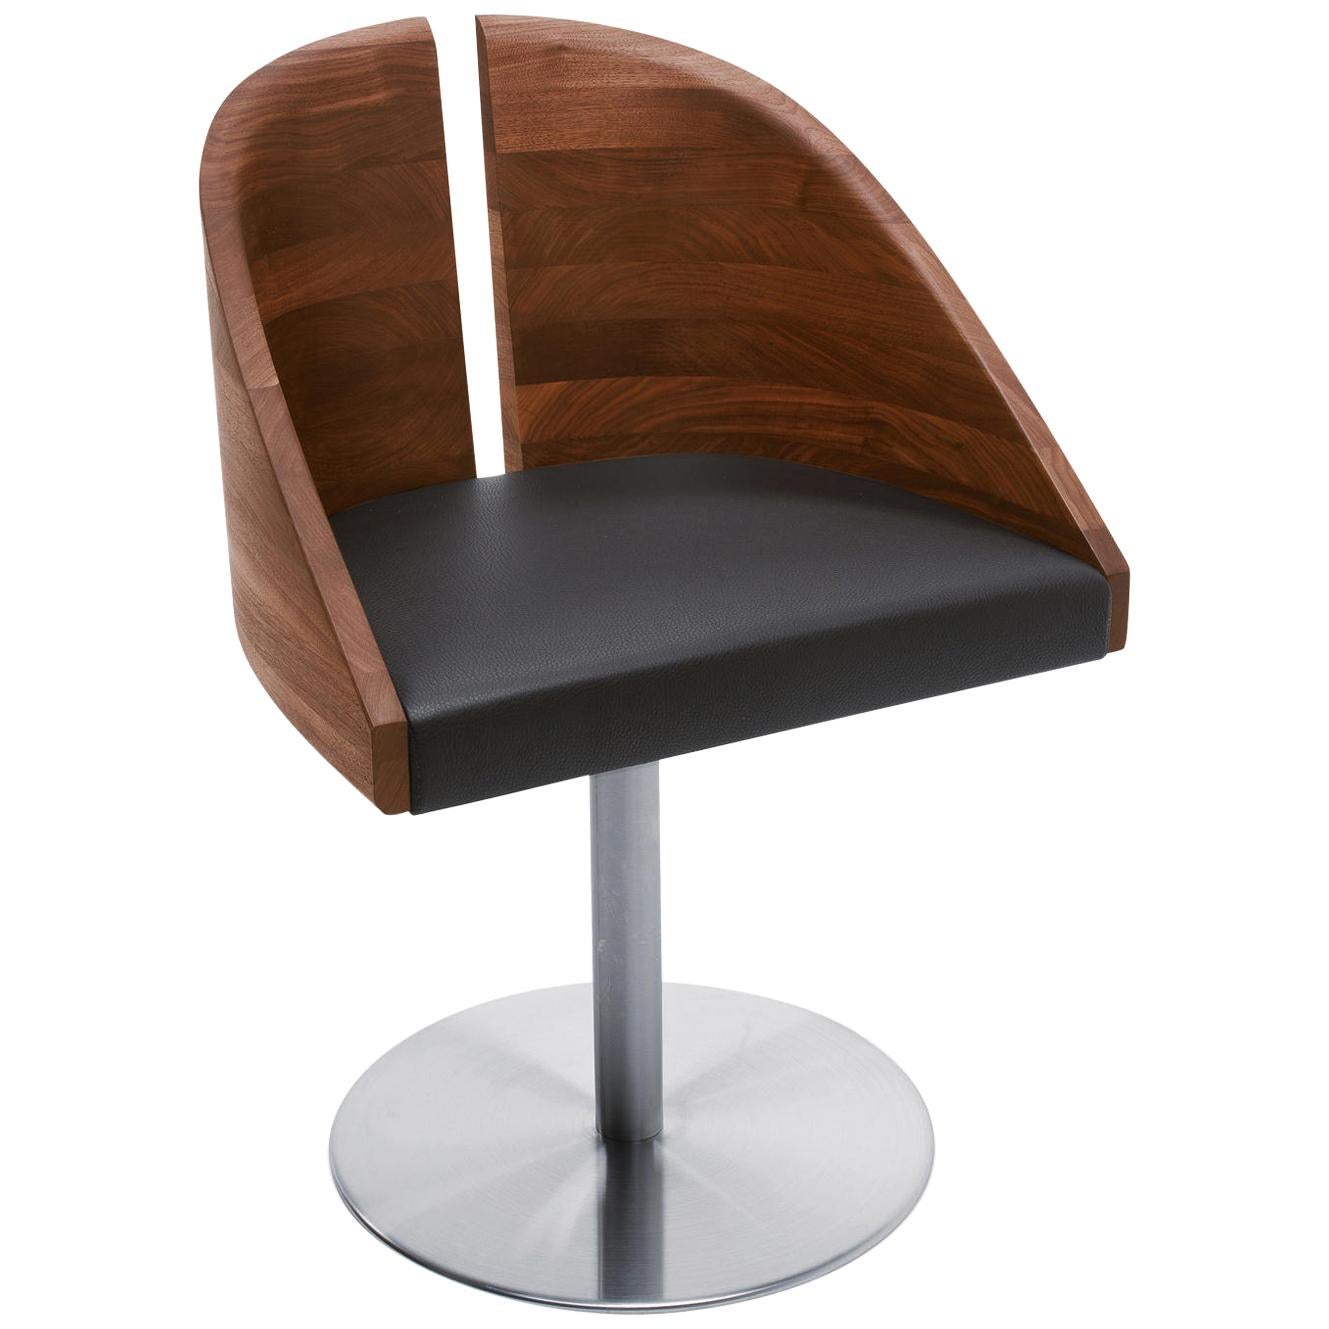 Curved Walnut and Leather Seat, Gala Chair by Riva 1920 For Sale